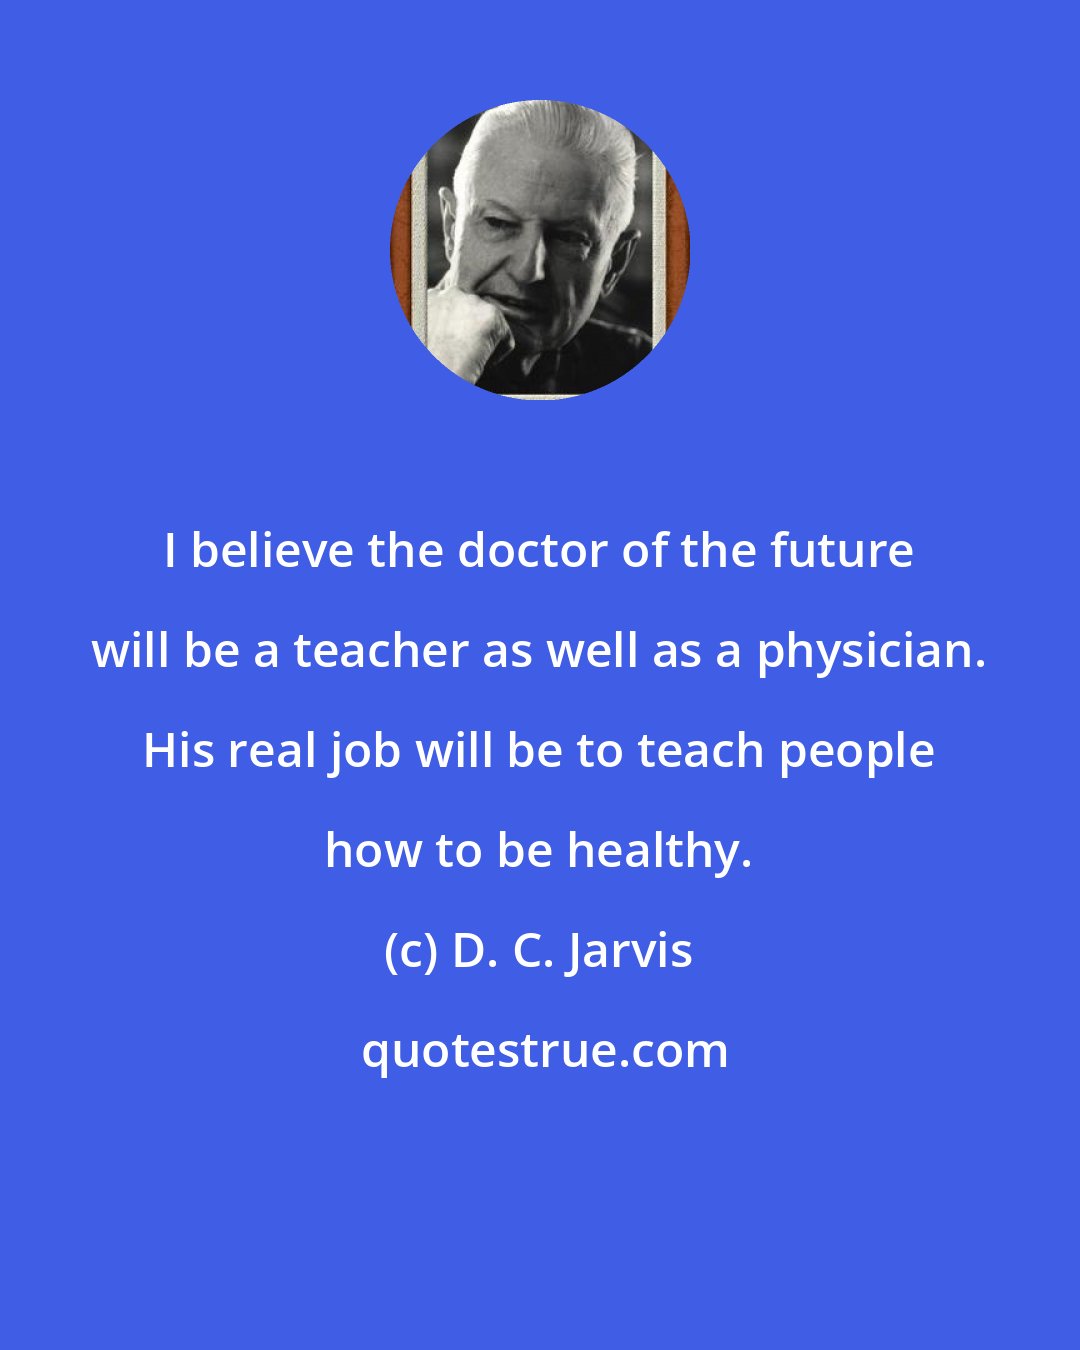 D. C. Jarvis: I believe the doctor of the future will be a teacher as well as a physician. His real job will be to teach people how to be healthy.